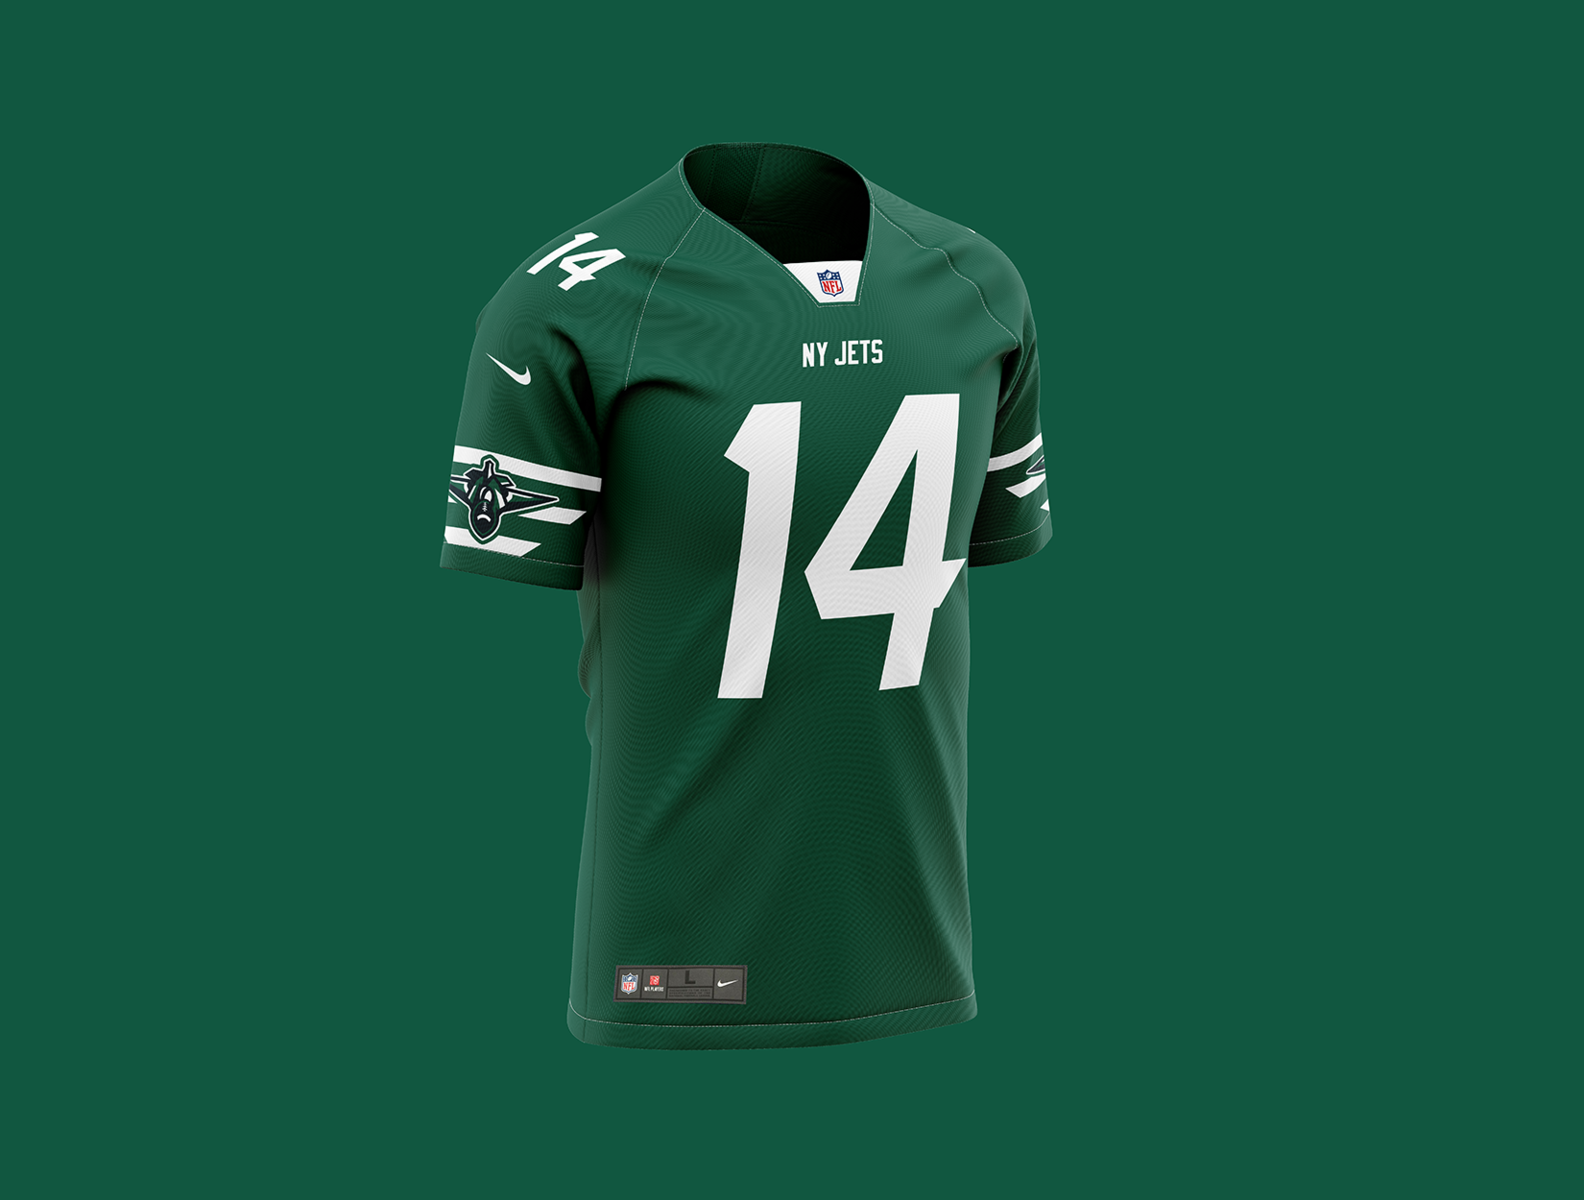 New York Jets Concept Jersey 2020 by Luc S. on Dribbble